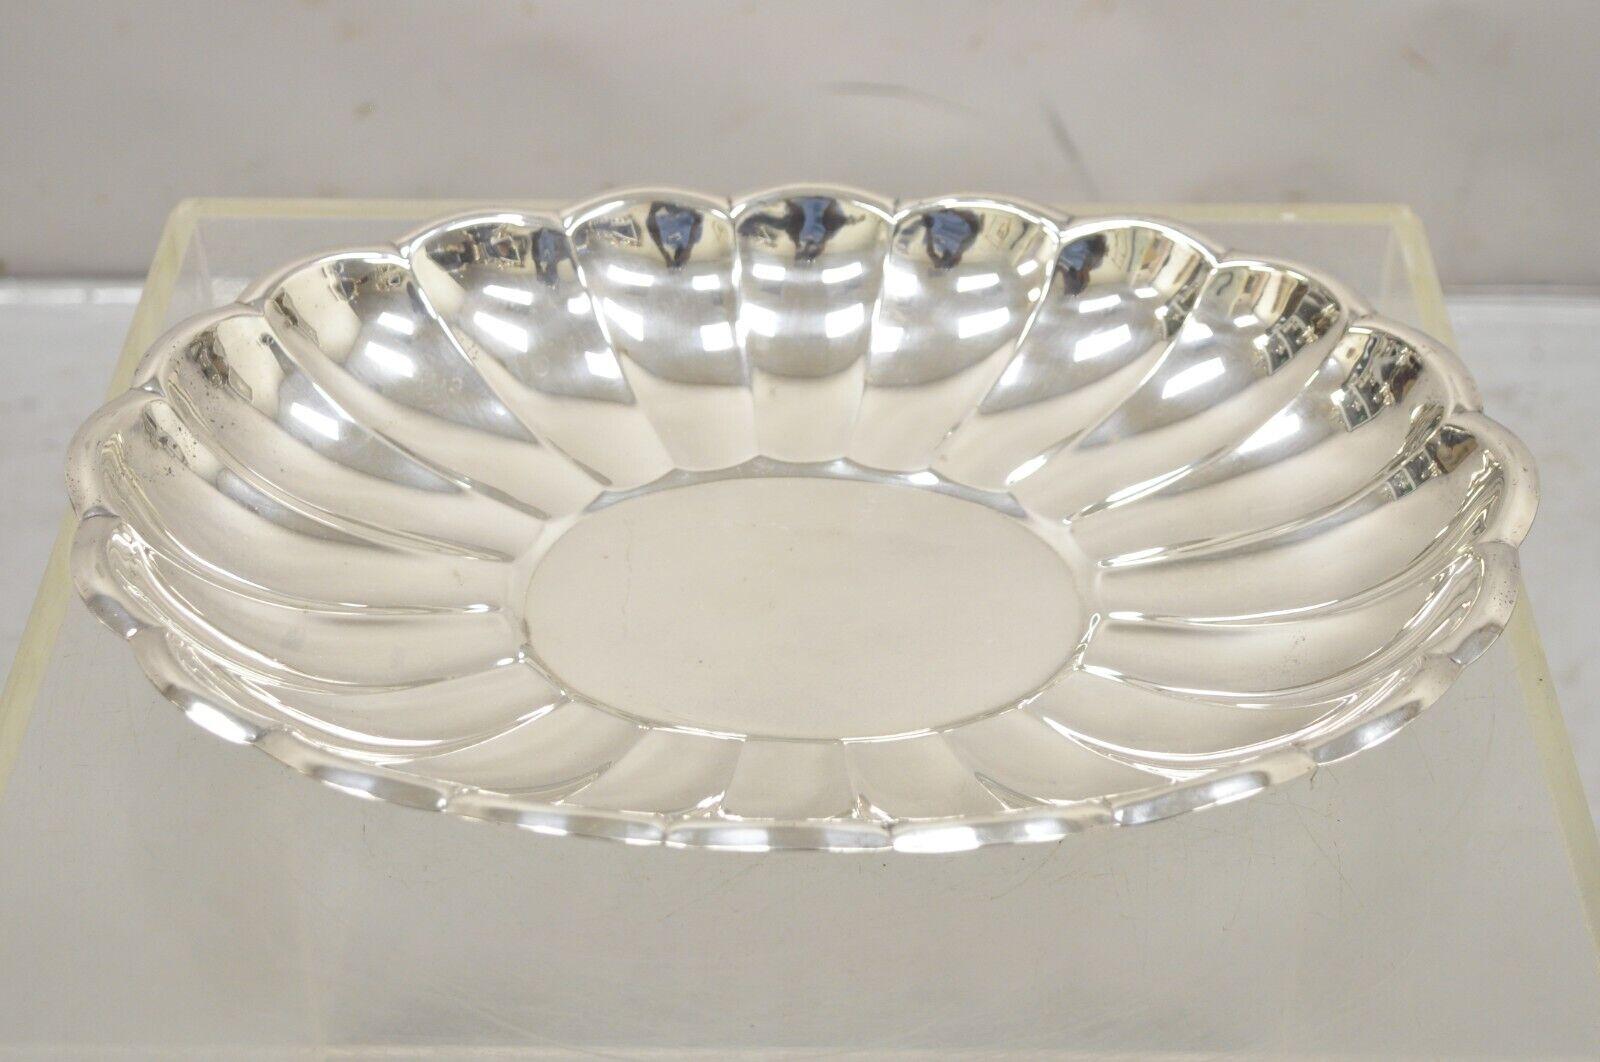 Vintage Regency Style Silver Plated Scalloped Oval Serving Platter Fruit Bowl. Circa mid to late 20th Century. Measurements:  2